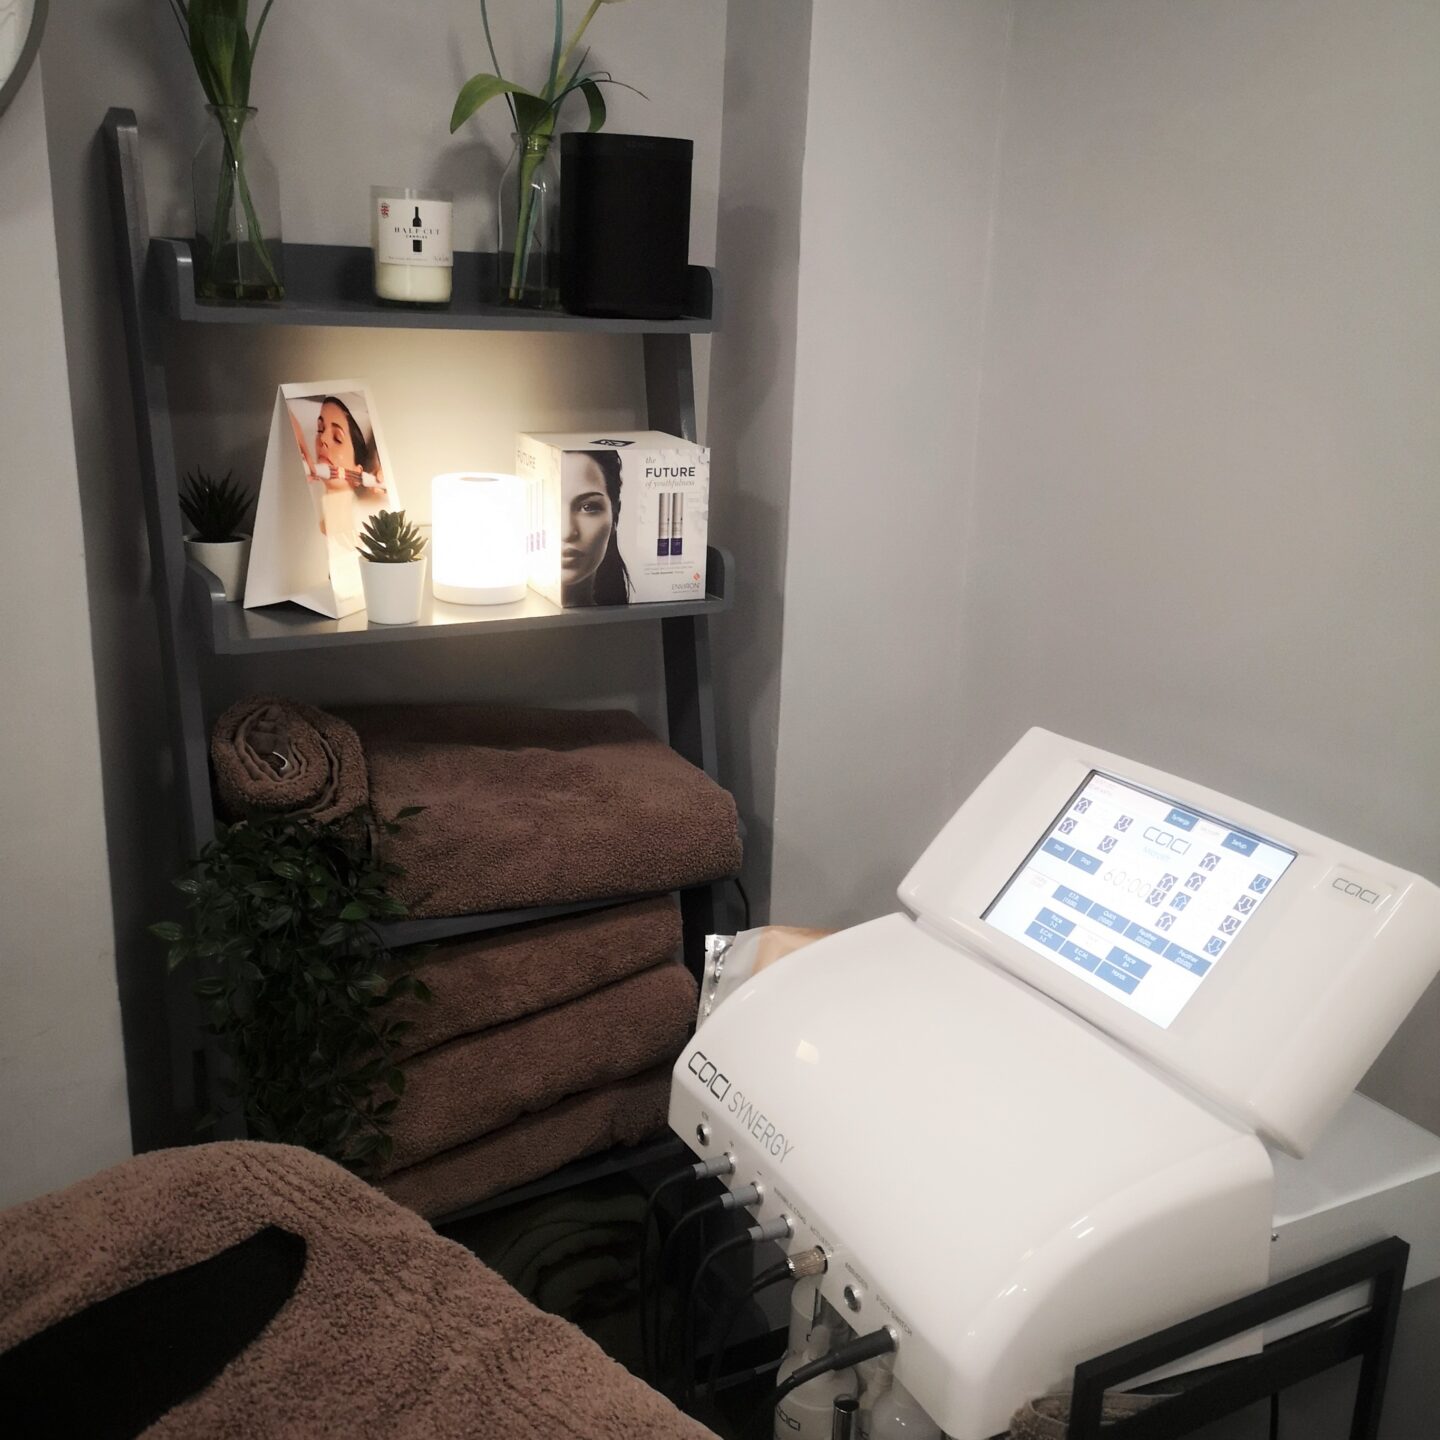 Skin & Beauty Clinic, Tenterden, Skin Clinic, Facial, Skin Health, Beauty Review, CACI Signature Non-Surgical Facial Toning, CACI Facial Treatment, Local Places, Kent Businesses, Skin Lift, Skin & Beauty Clinic Review, Facials Review, the Frenchie Mummy